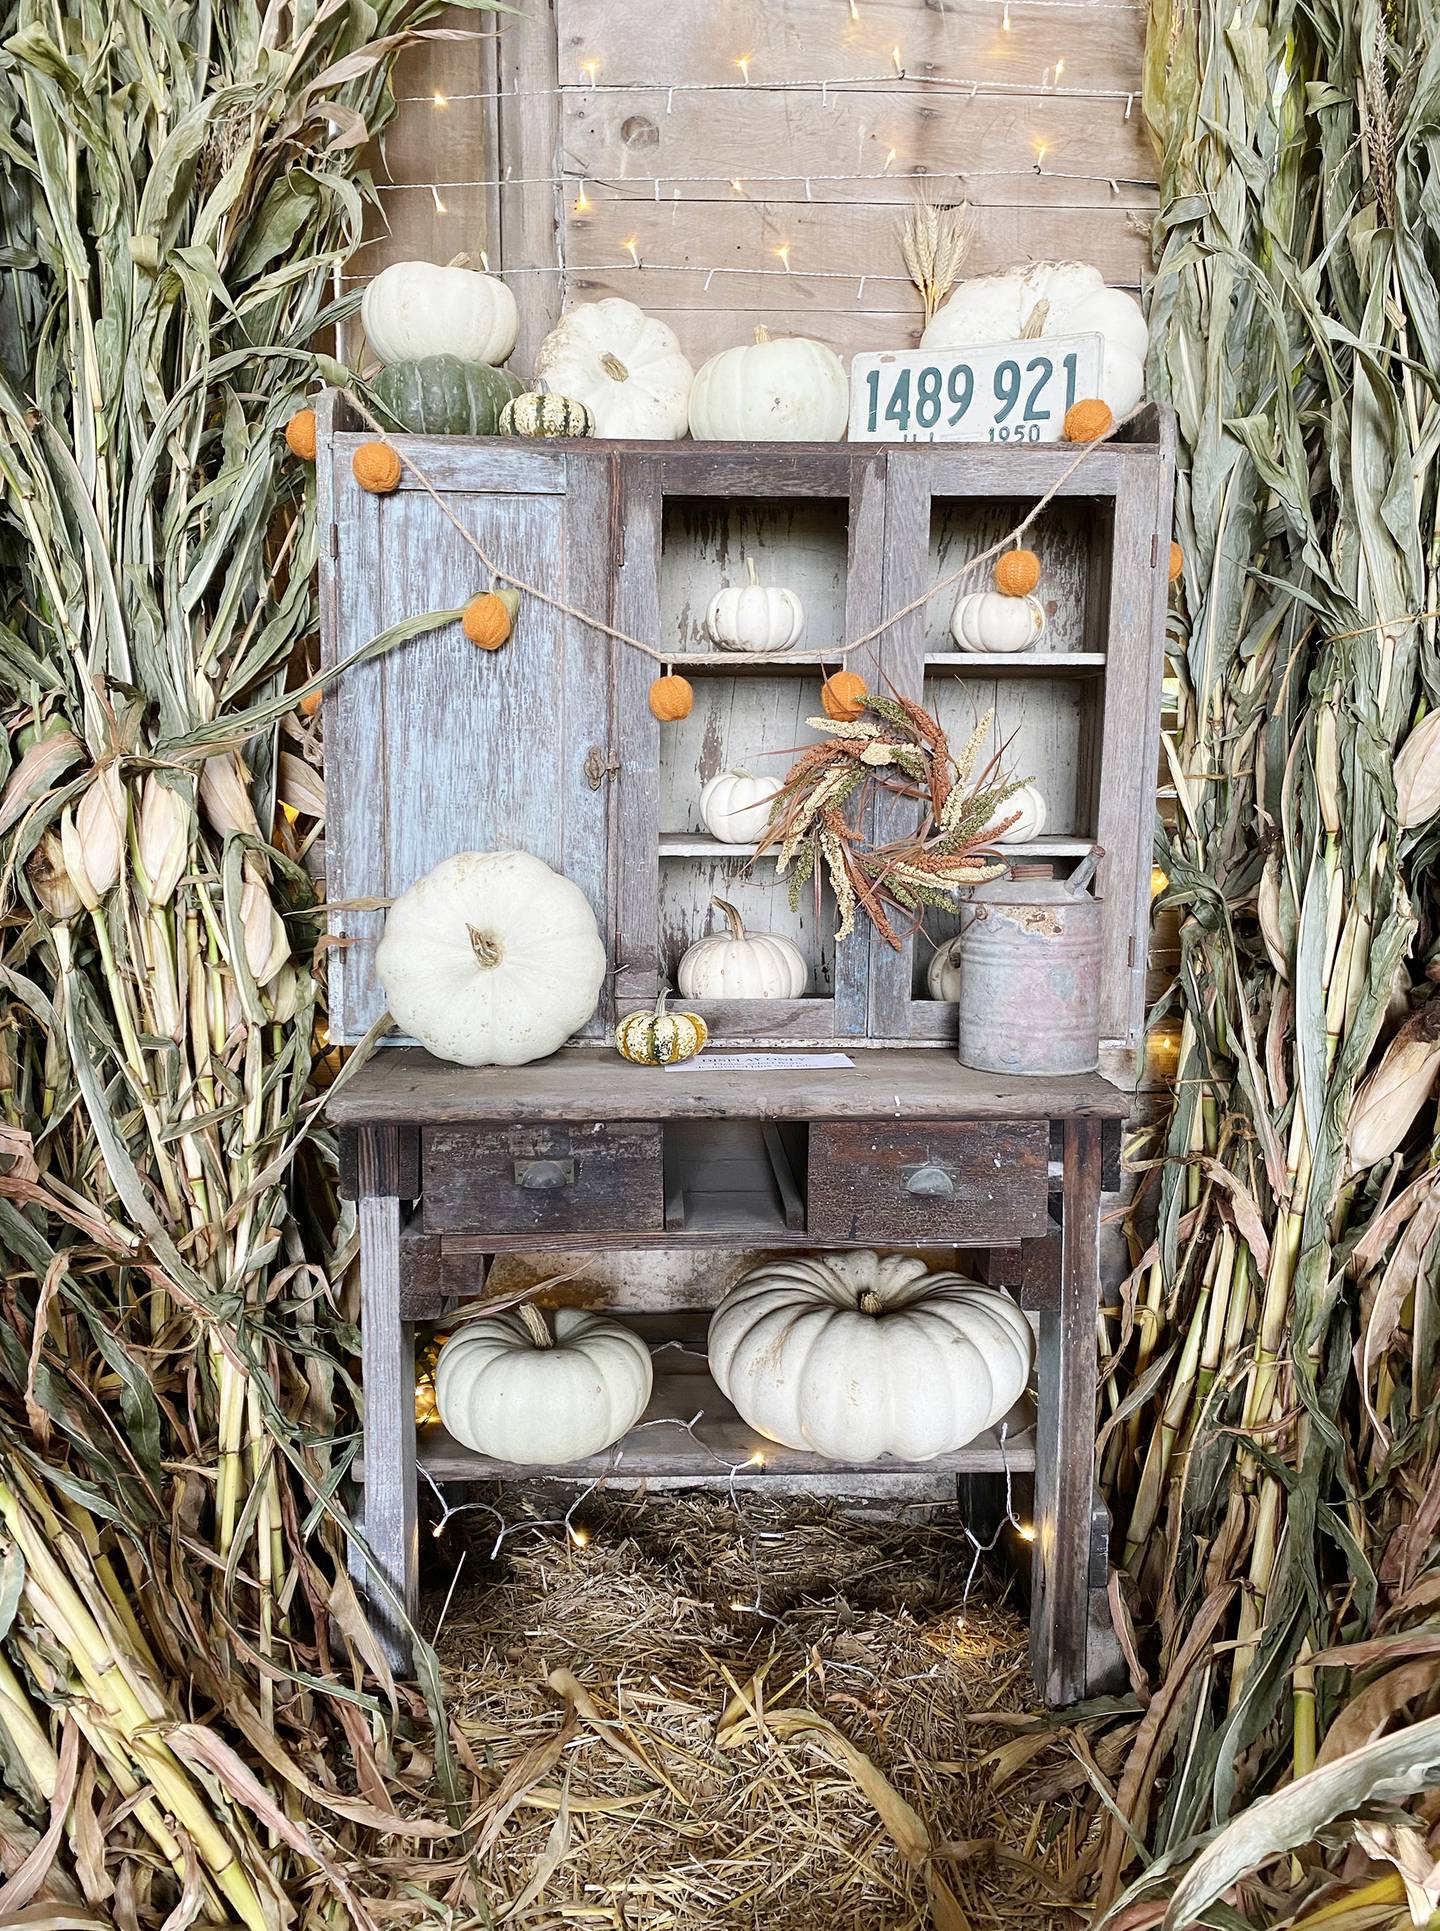 There are no animals, hayrides or concessions at Sugar Grove Pumpkin Farm, 4S041 Merrill Road, Sugar Grove. Fall decor is the focus and interesting displays such as this one inside the barn give visitors great ideas to try at home.